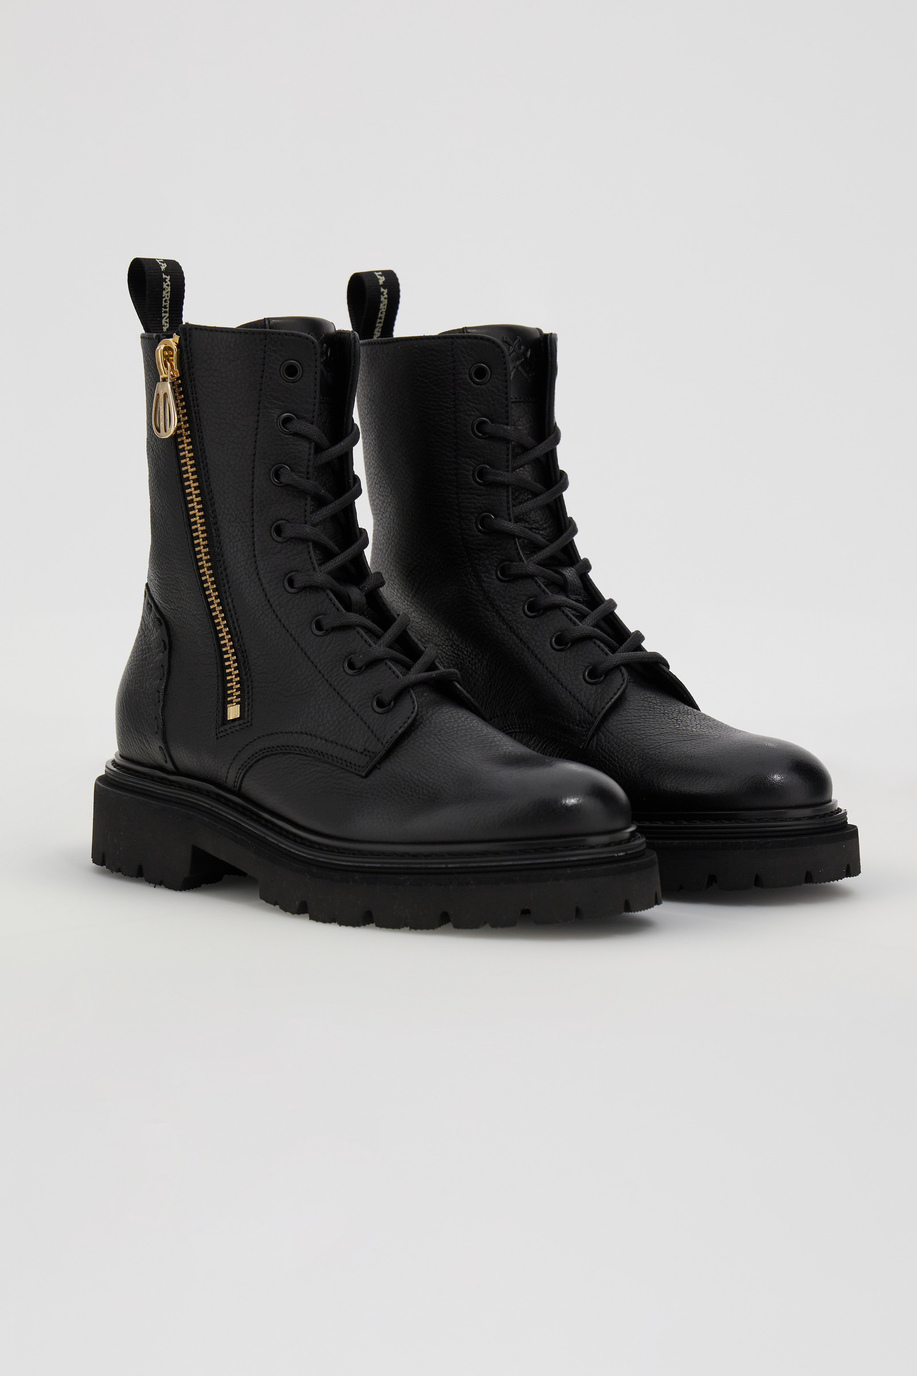 Zipped city boot in leather - Woman shoes | La Martina - Official Online Shop